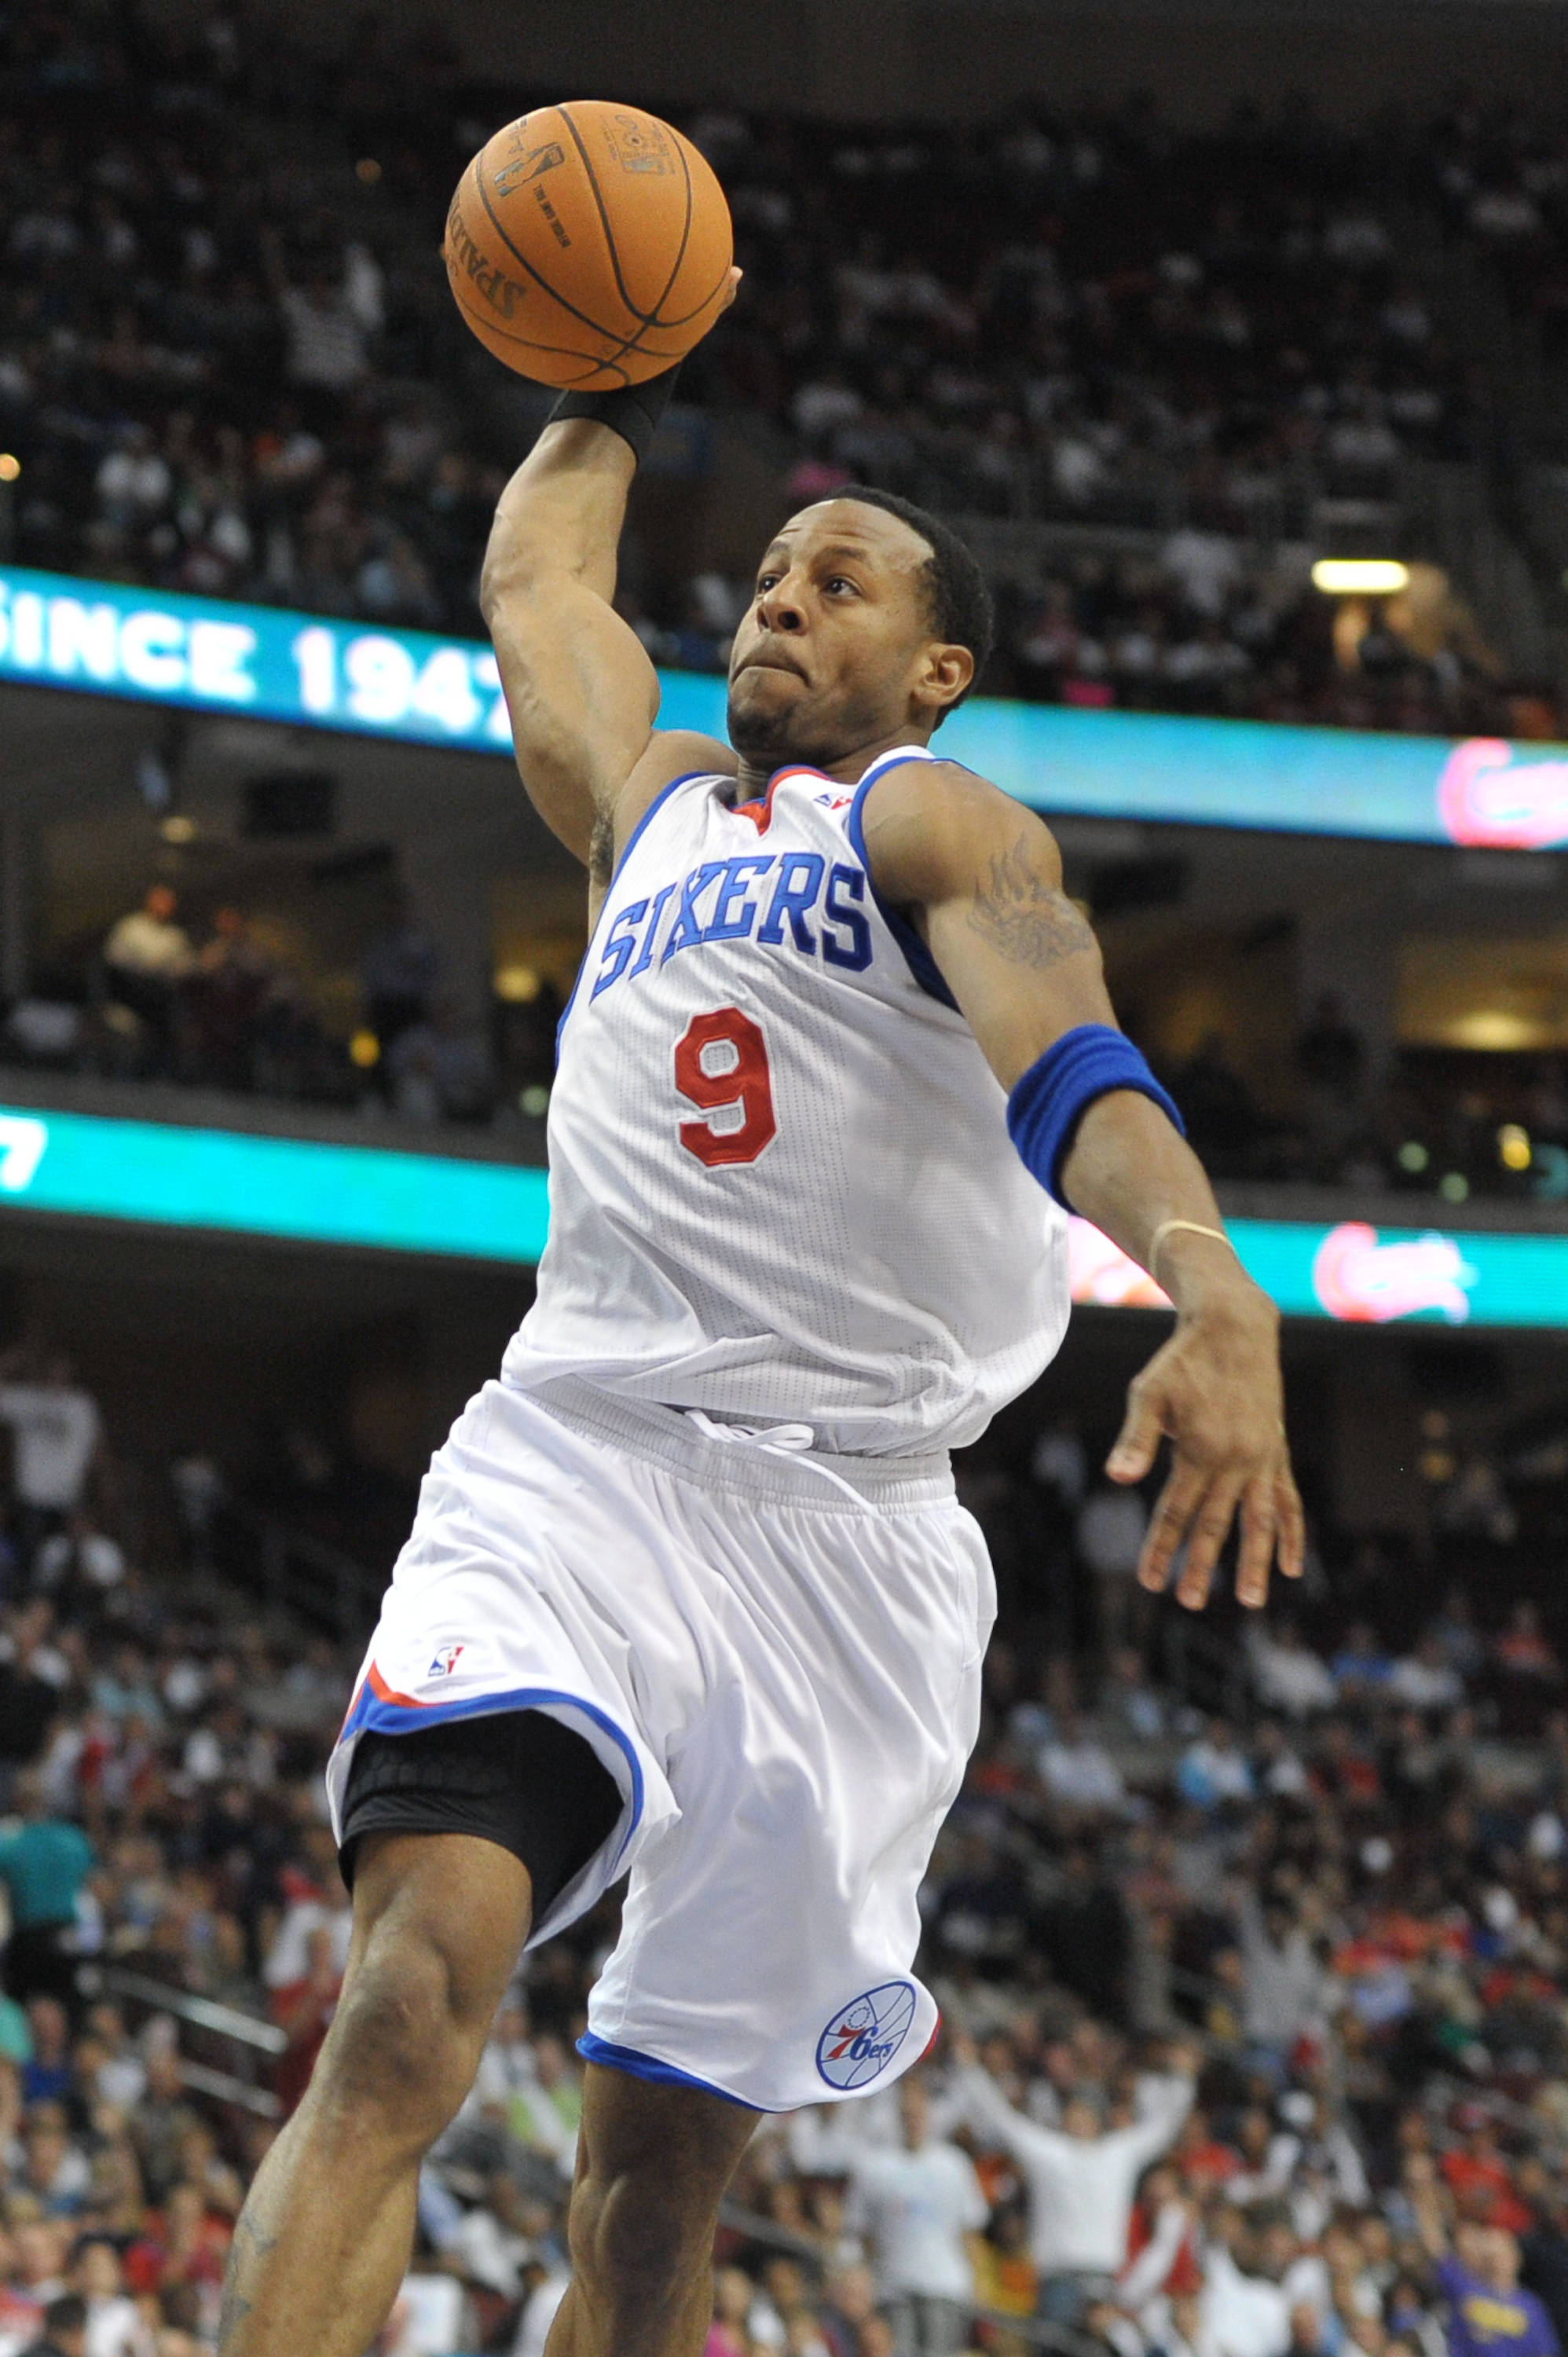 PHILADELPHIA - OCTOBER 27:  Andre Iguodala #9 of the Philadelphia 76ers in action during the game against the Miami Heat at the Wells Fargo Center on October 27, 2010 in Philadelphia, Pennsylvania. NOTE TO USER: User expressly acknowledges and agrees that